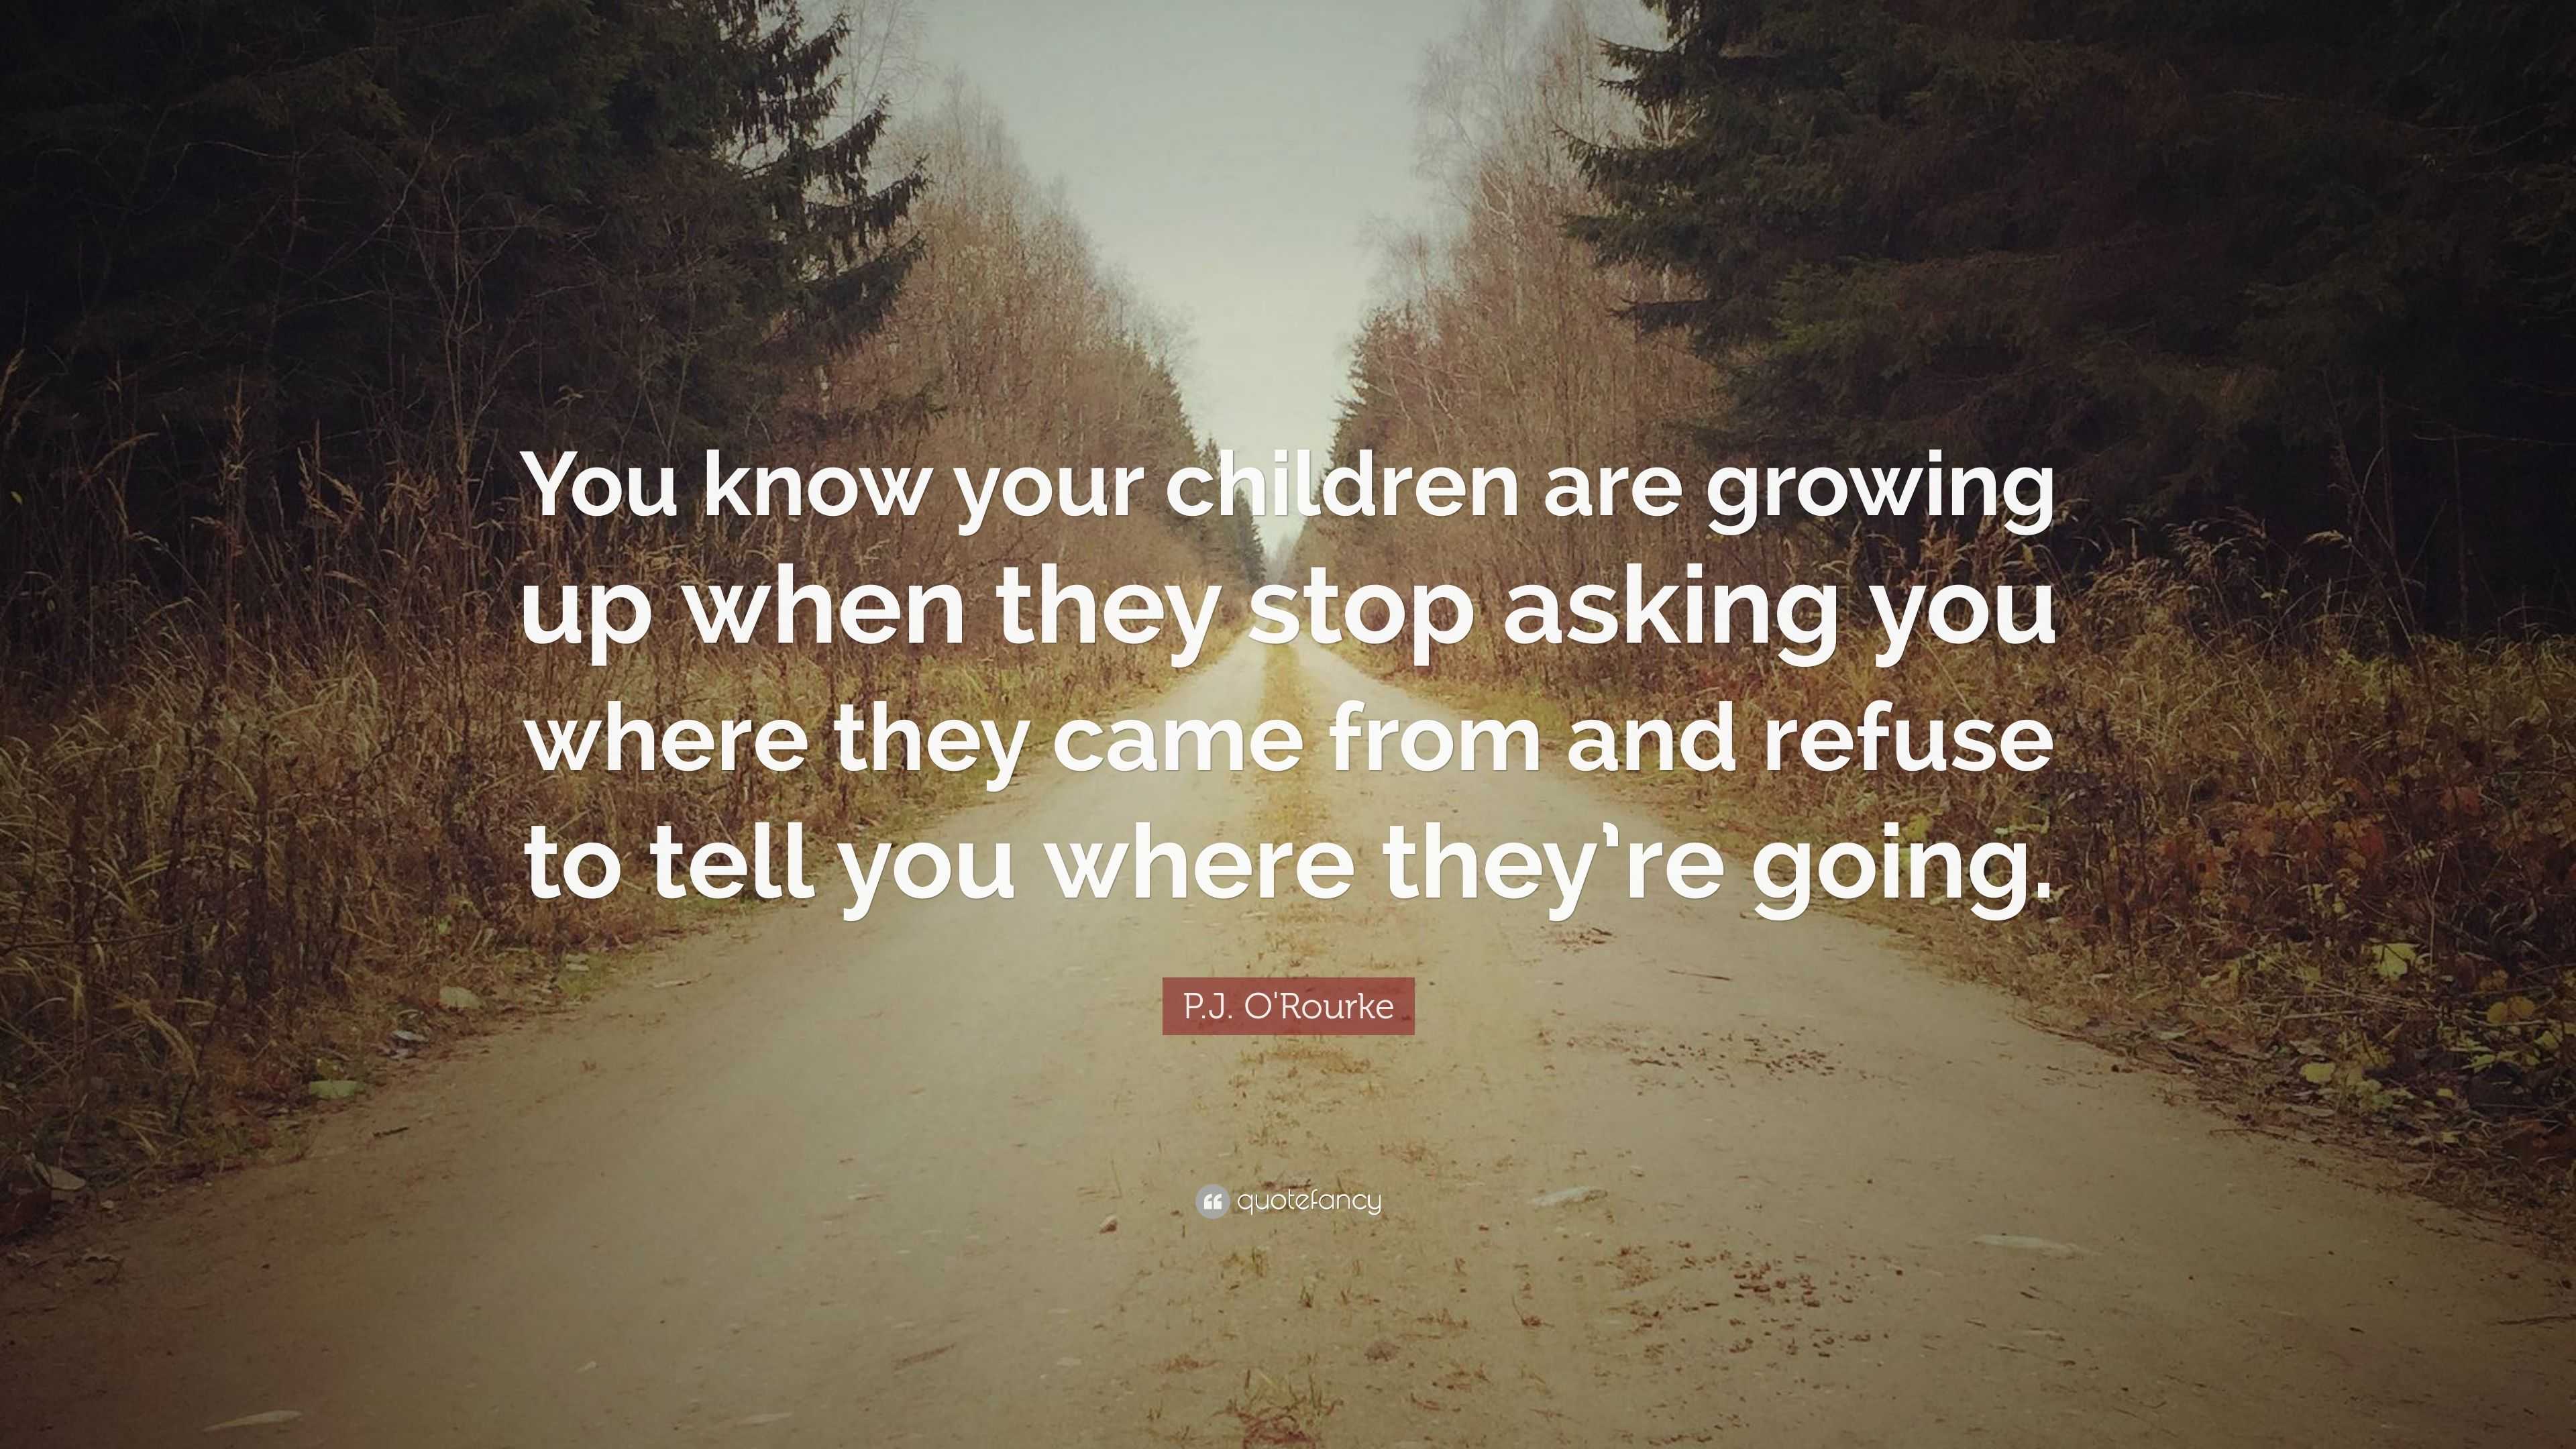 P.J. O'Rourke Quote: “You know your children are growing up when they ...